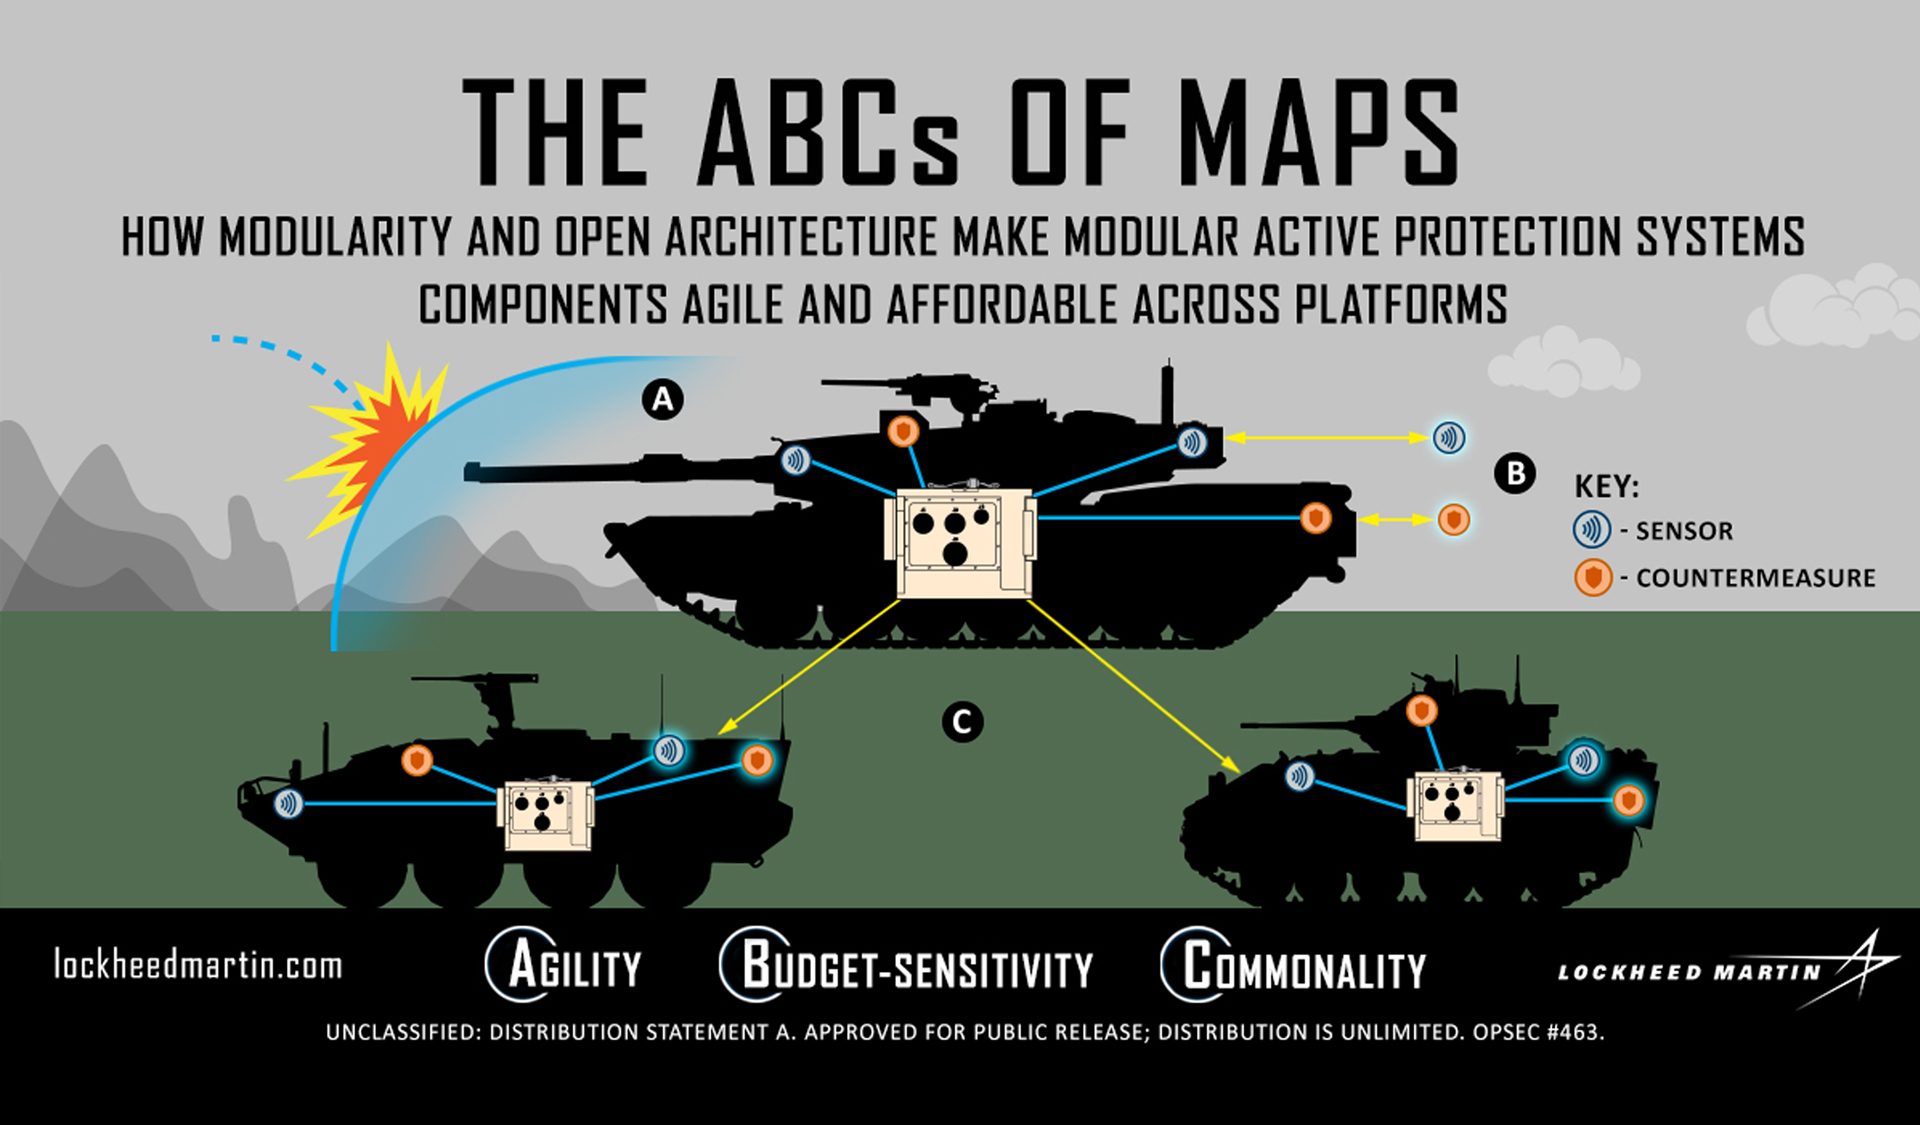  U.S. Army's Modular Active Protection System (MAPS) 